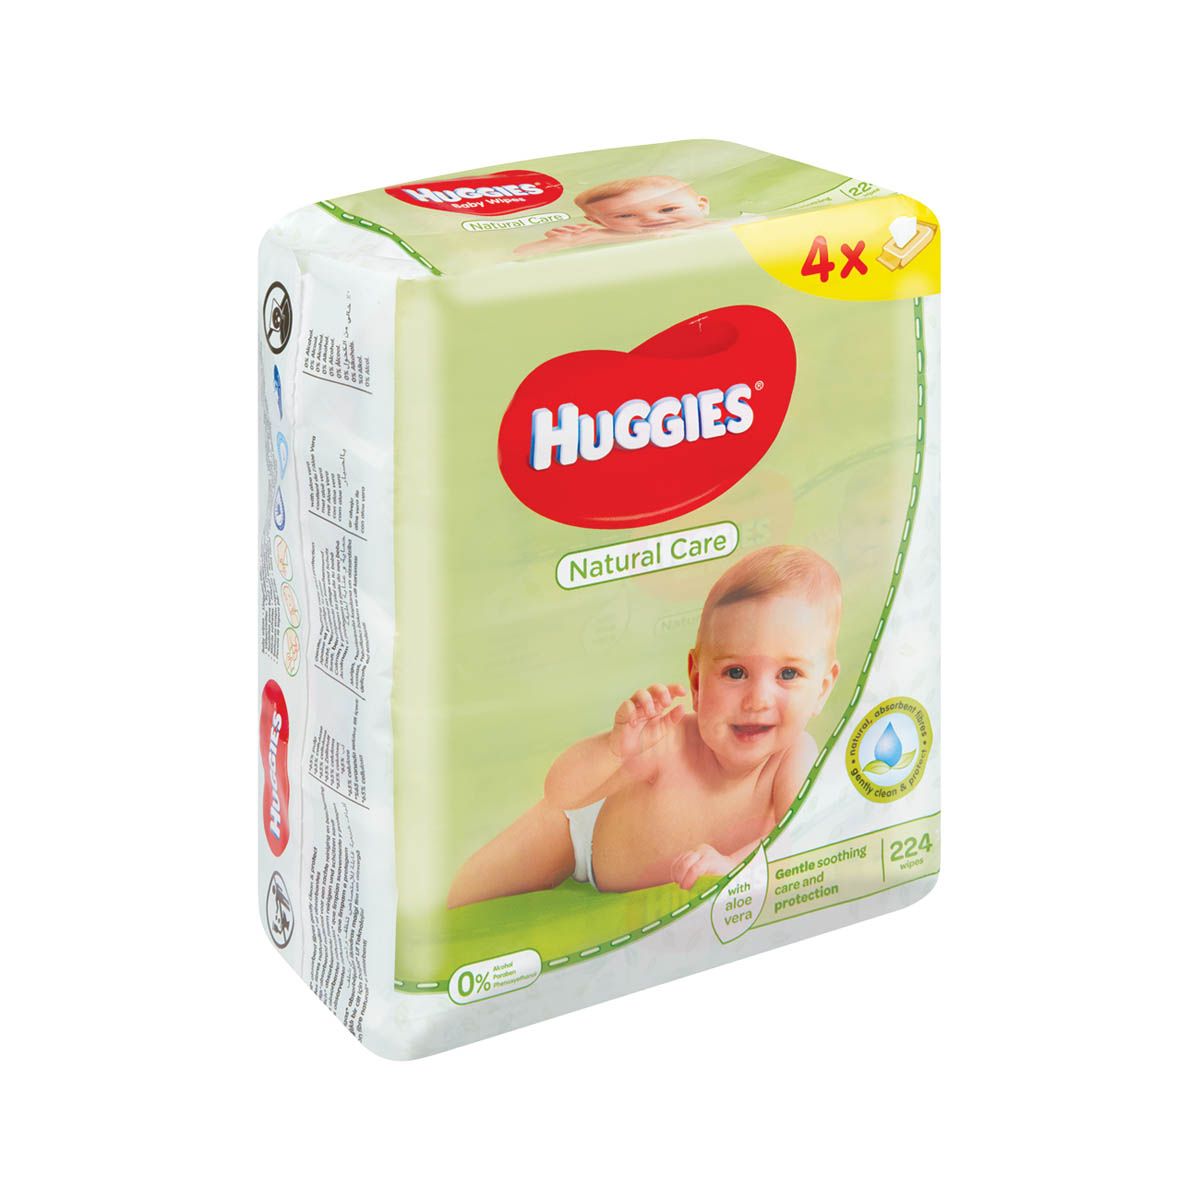 Huggies Natural Care Baby Wipes, 4x56's